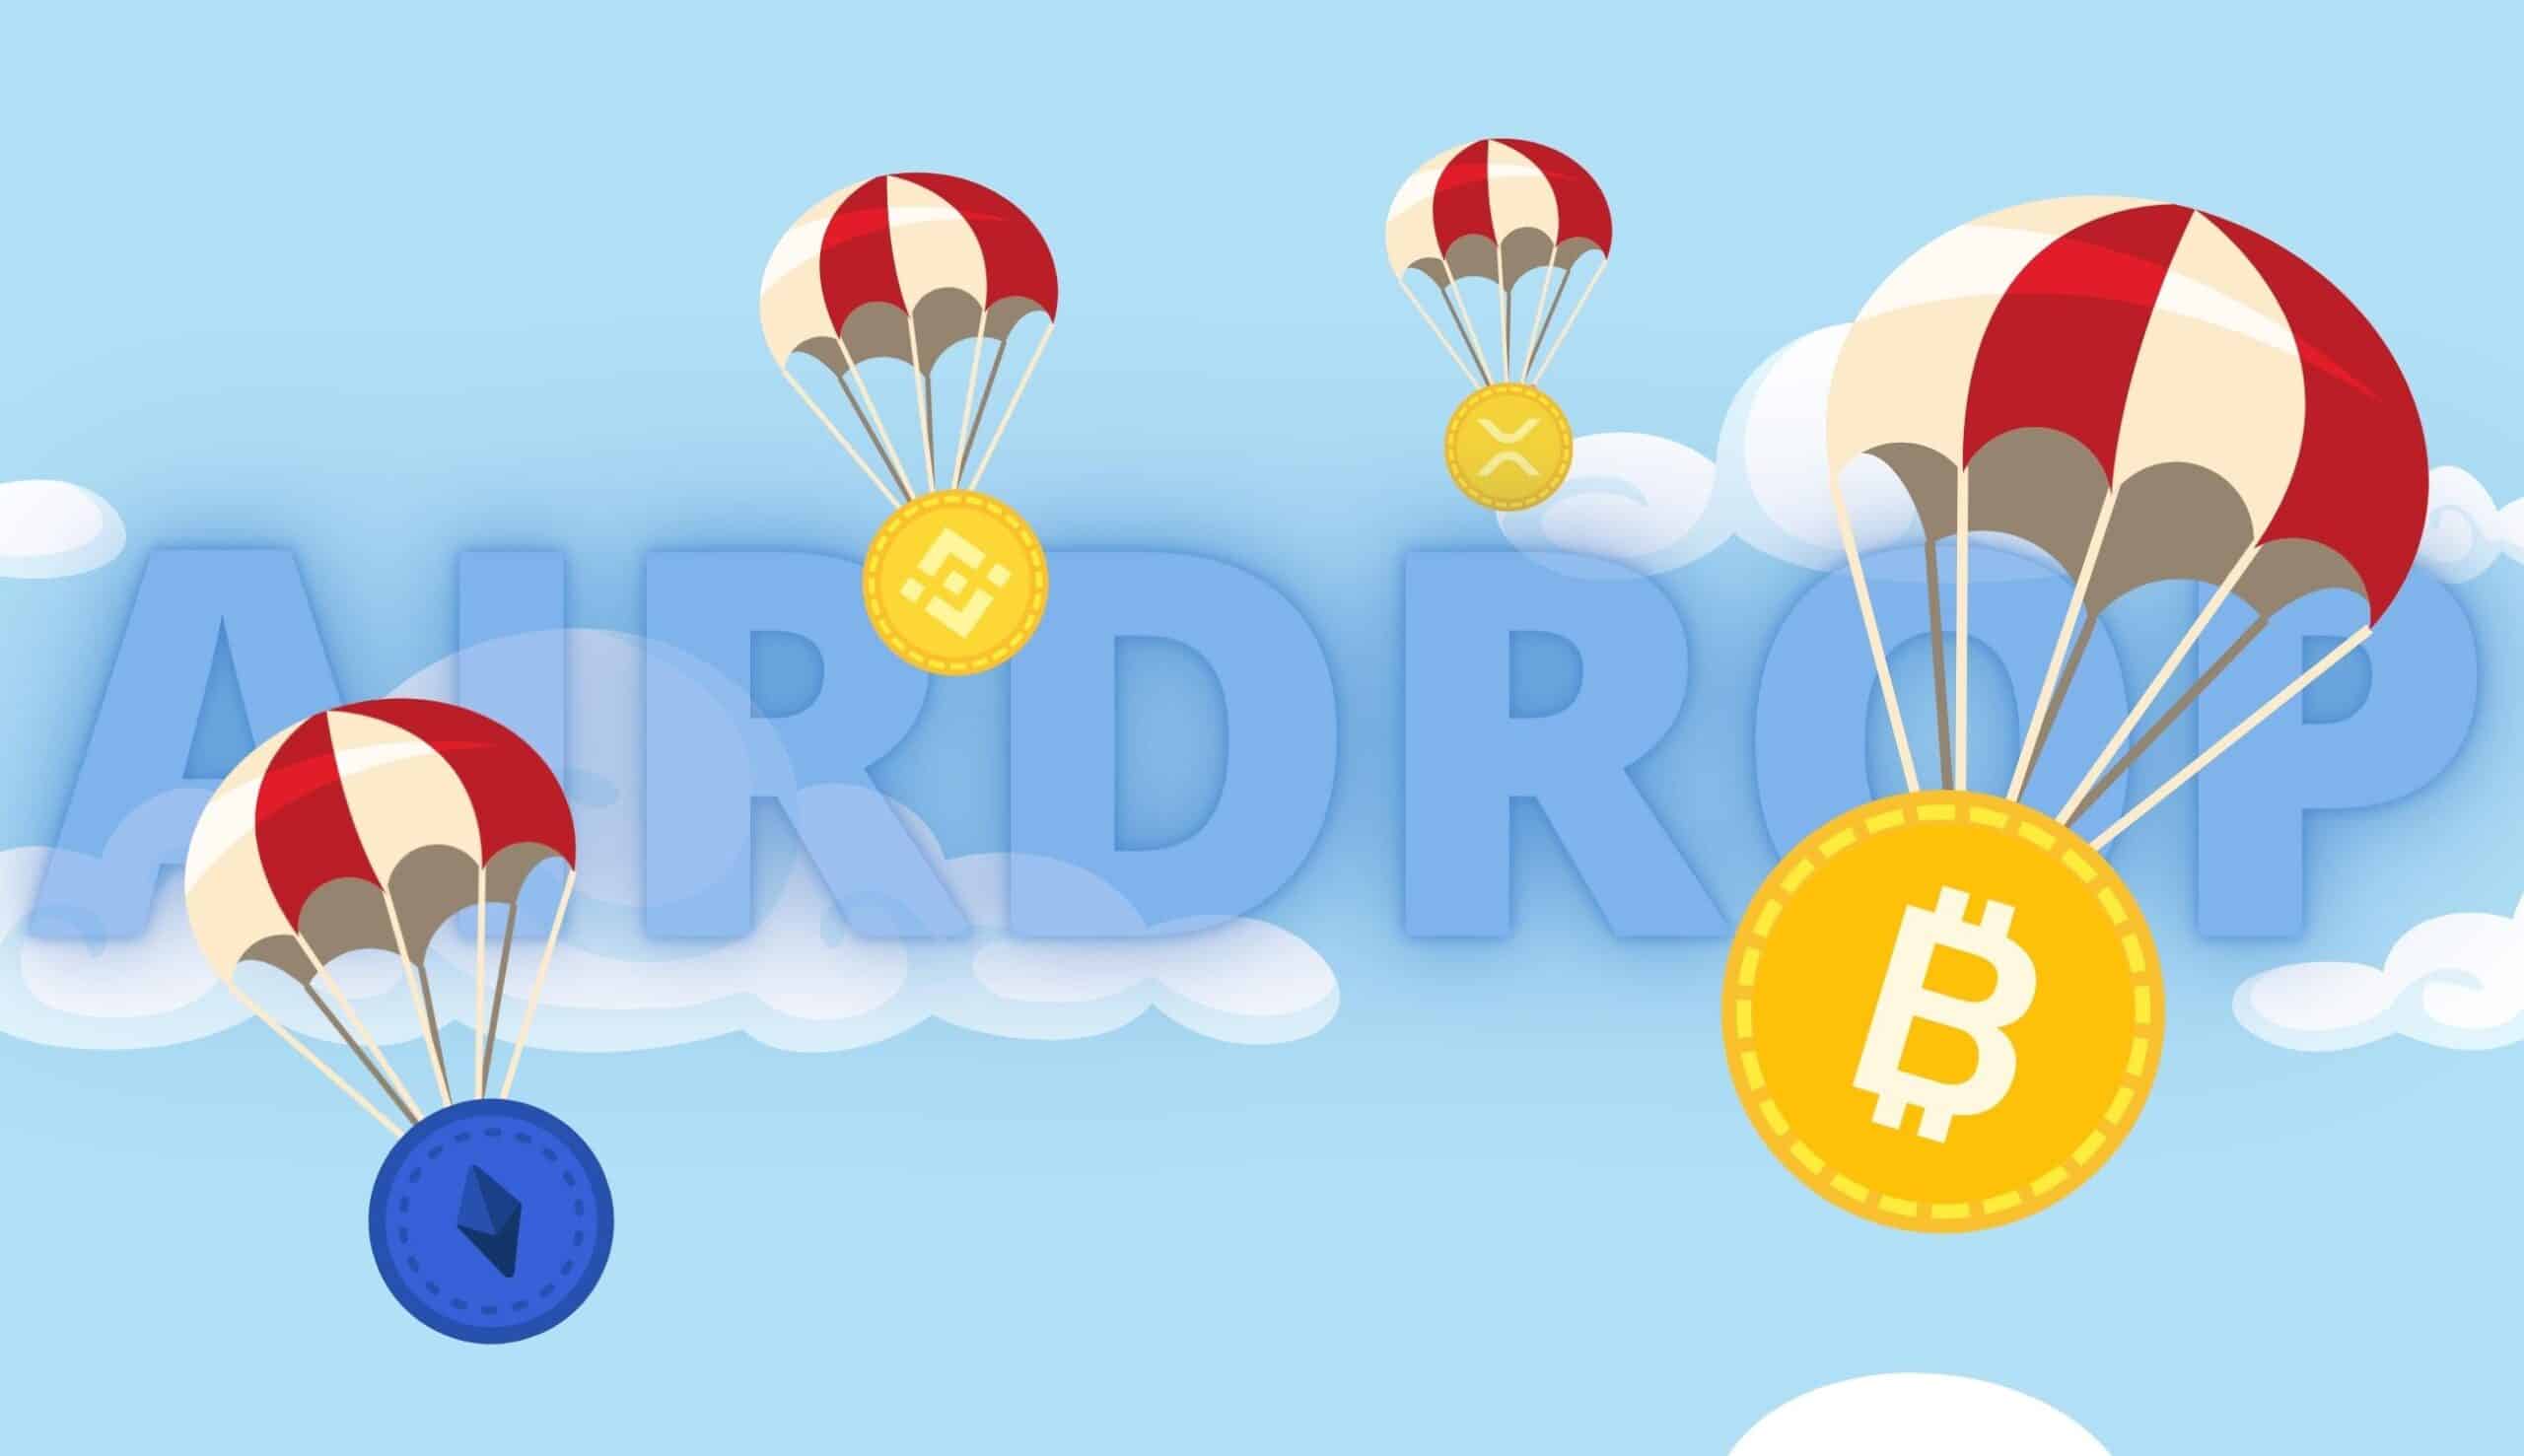 Actual Airdrops - where cryptocurrency is distributed for free in 2022